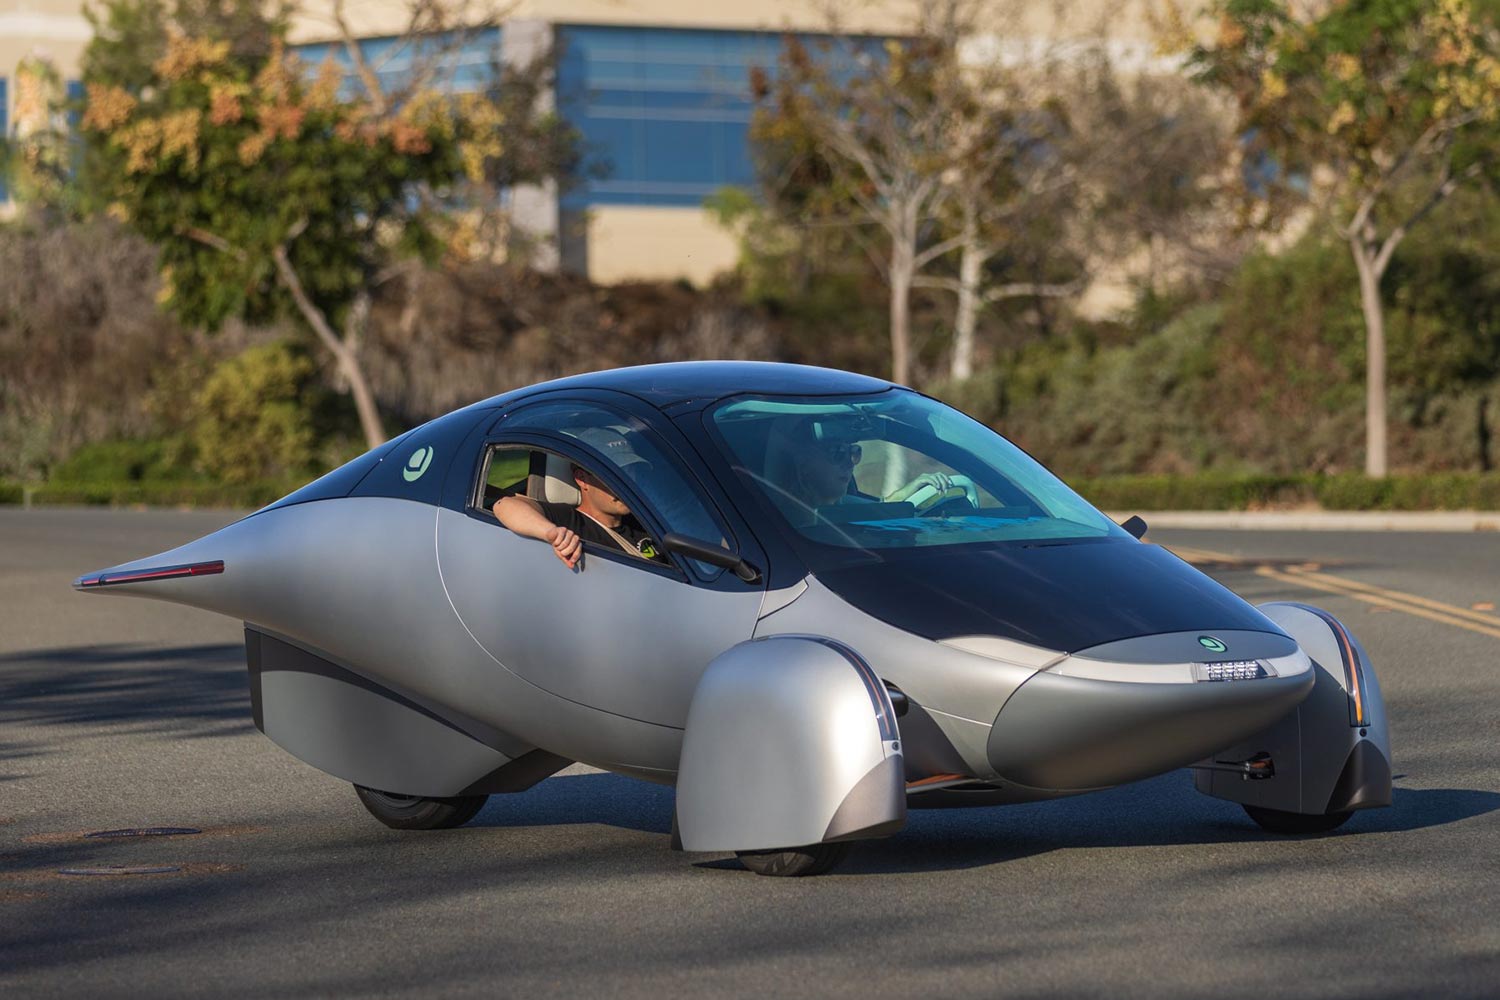 The Aptera Gamma, a three-wheeled electric vehicle with solar panels on the roof